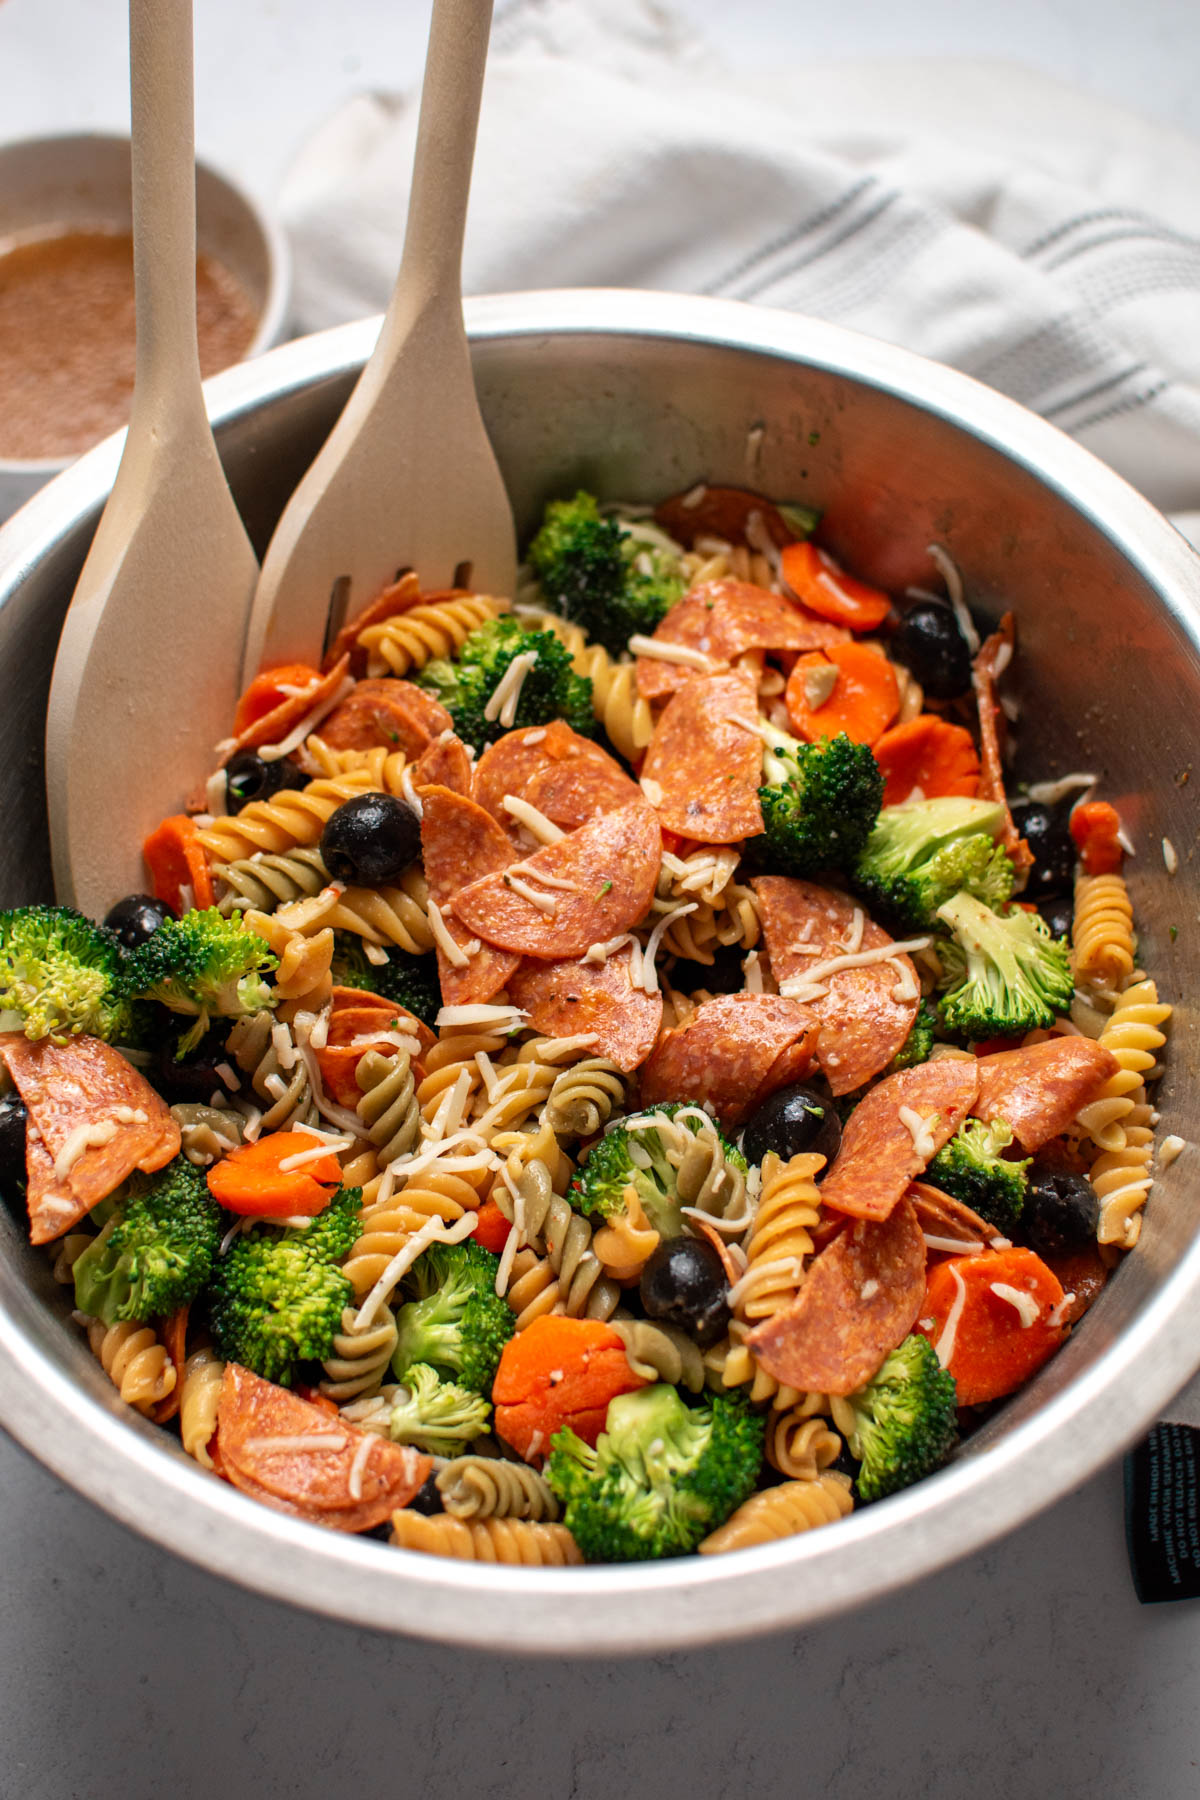 Two wooden spoons rest in bowl of Italian pasta salad with fresh vegetables.